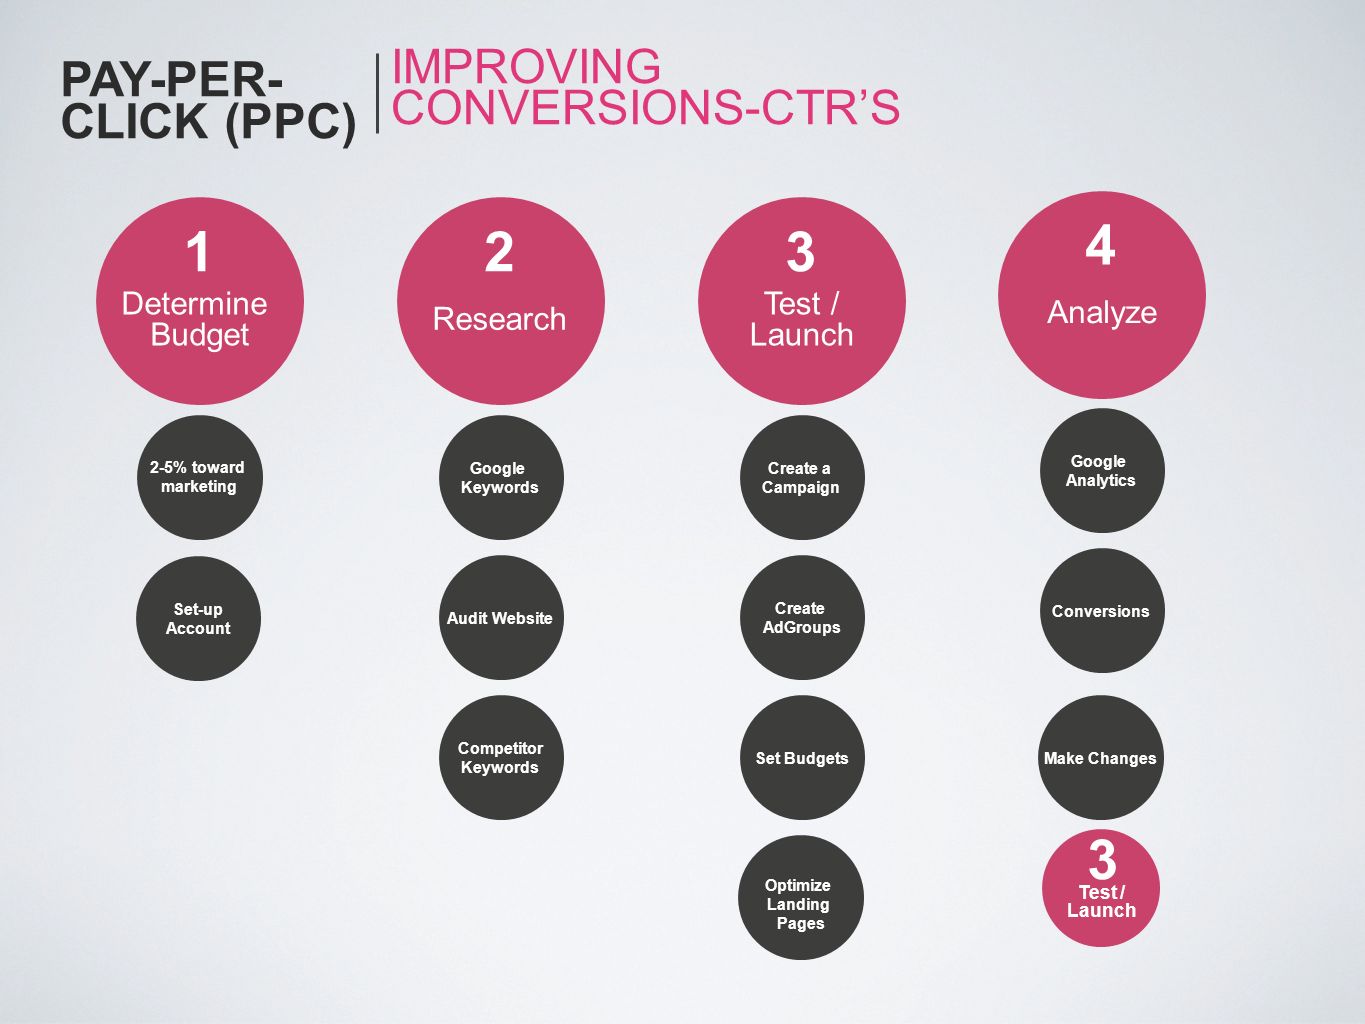 PAY-PER-CLICK (PPC) IMPROVING CONVERSIONS-CTR’S Determine